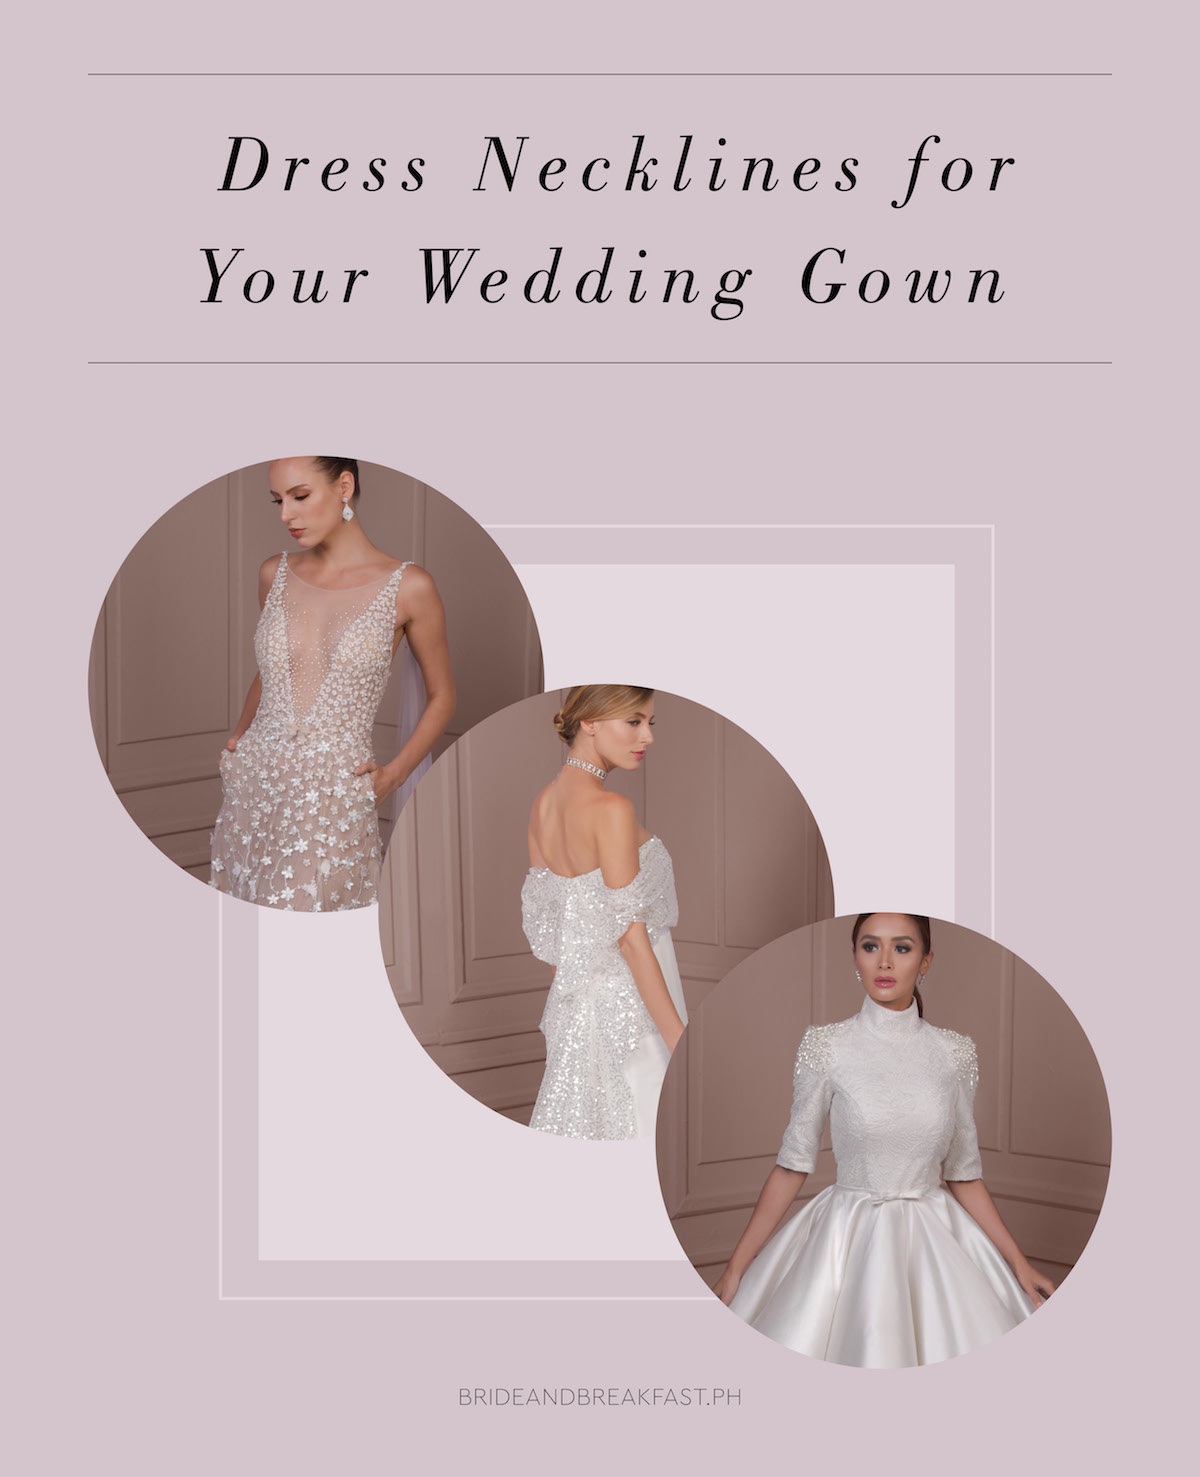 Dress Necklines for Your Wedding Gown